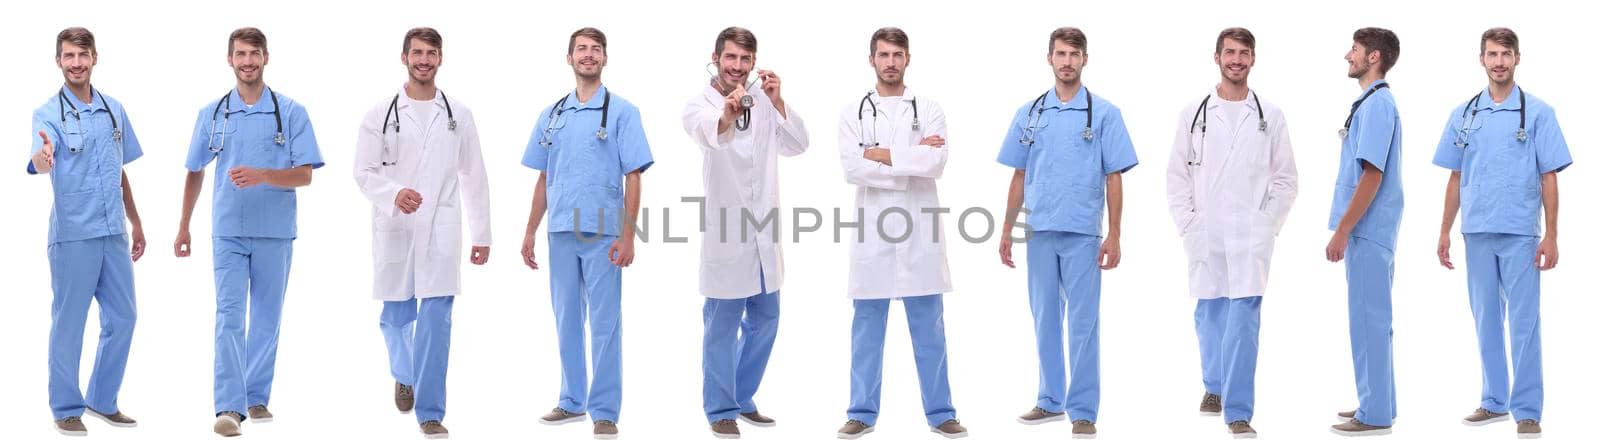 panoramic collage group of medical doctors . isolated on white by asdf